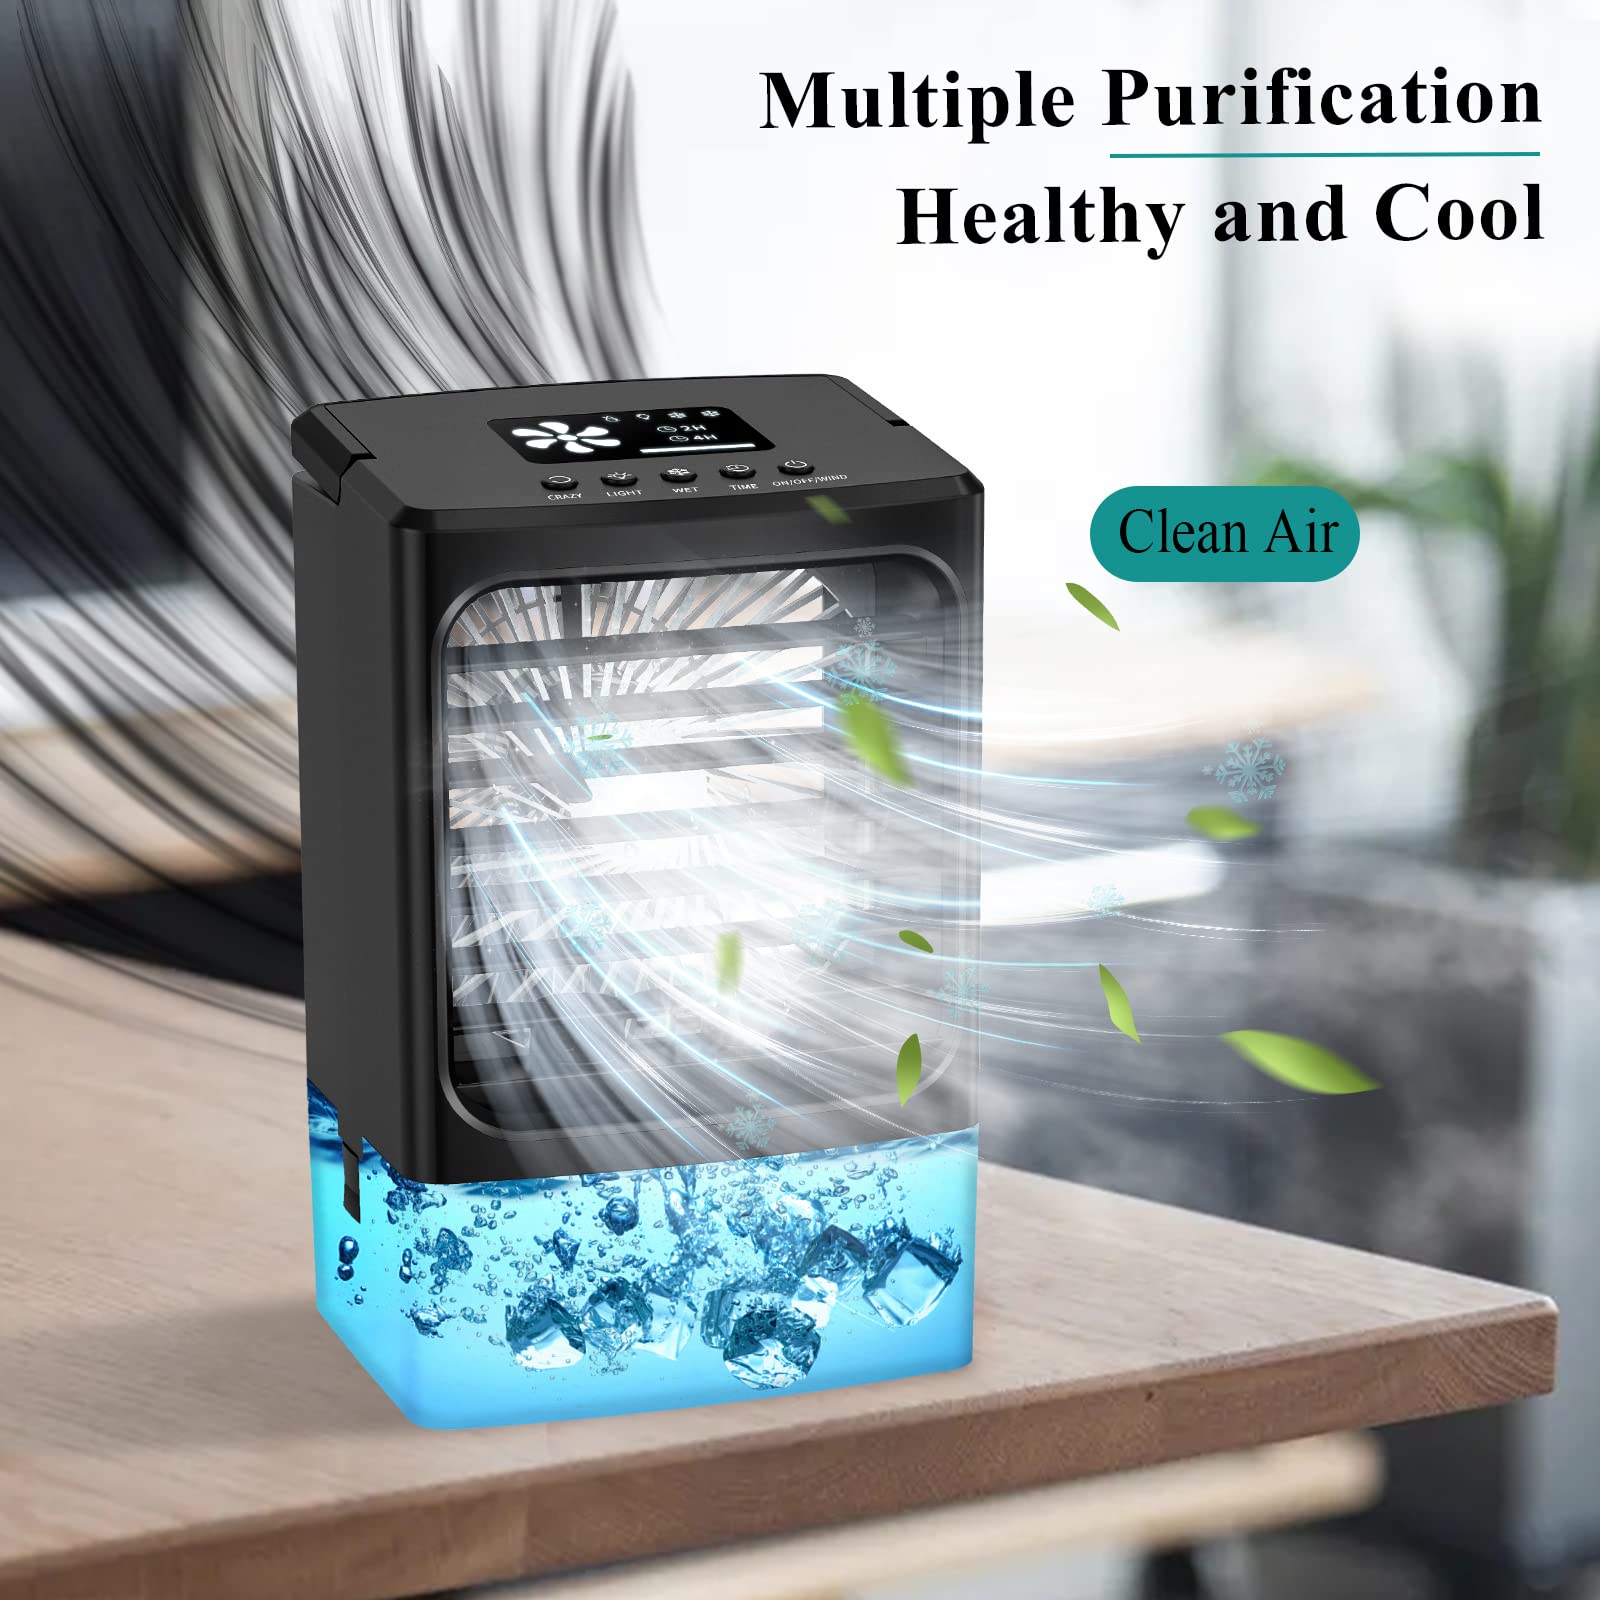 OVPPH Portable Air Conditioner, Personal Air Cooler Fan Mini Evaporative Cooler Desk Table Fan, Quiet Air Circulator Humidifier Misting Fan with 3 Speeds for Home Bedroom Office (Black)